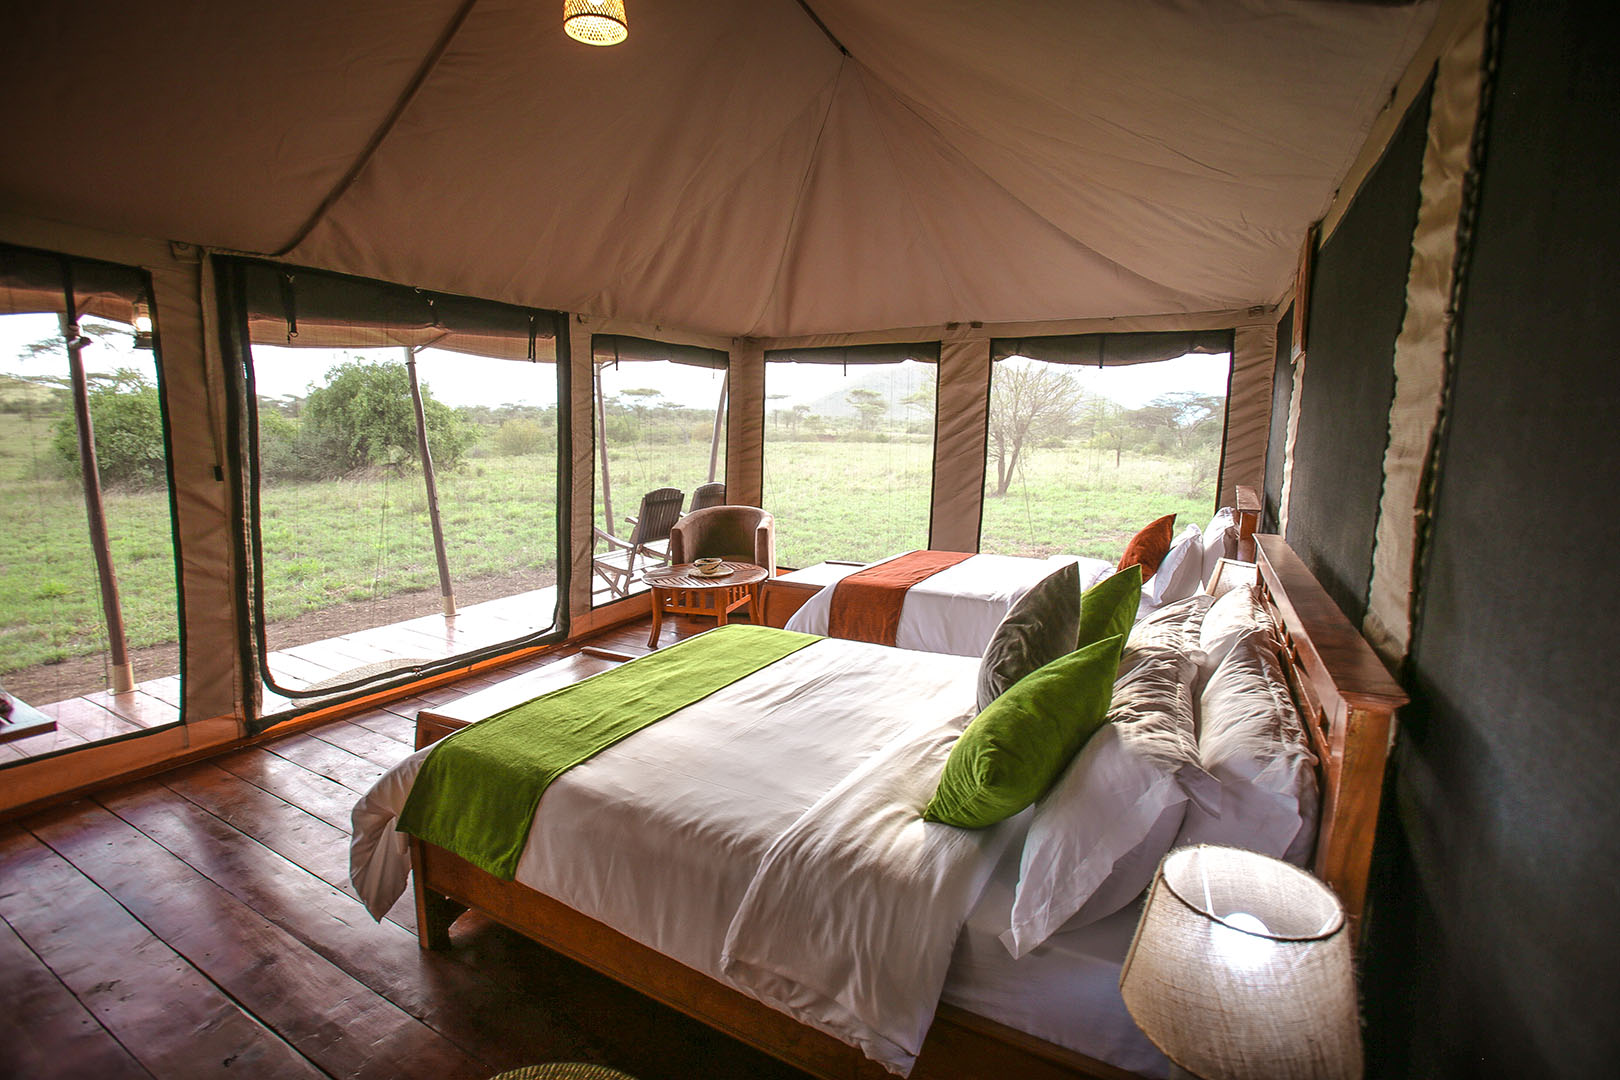 Embalakai Serengeti Camp, nestled in the heart of the central Serengeti, offers a truly luxurious experience. The camp features a collection of stunning luxury tents that have been carefully designed to provide the utmost comfort to its guests.